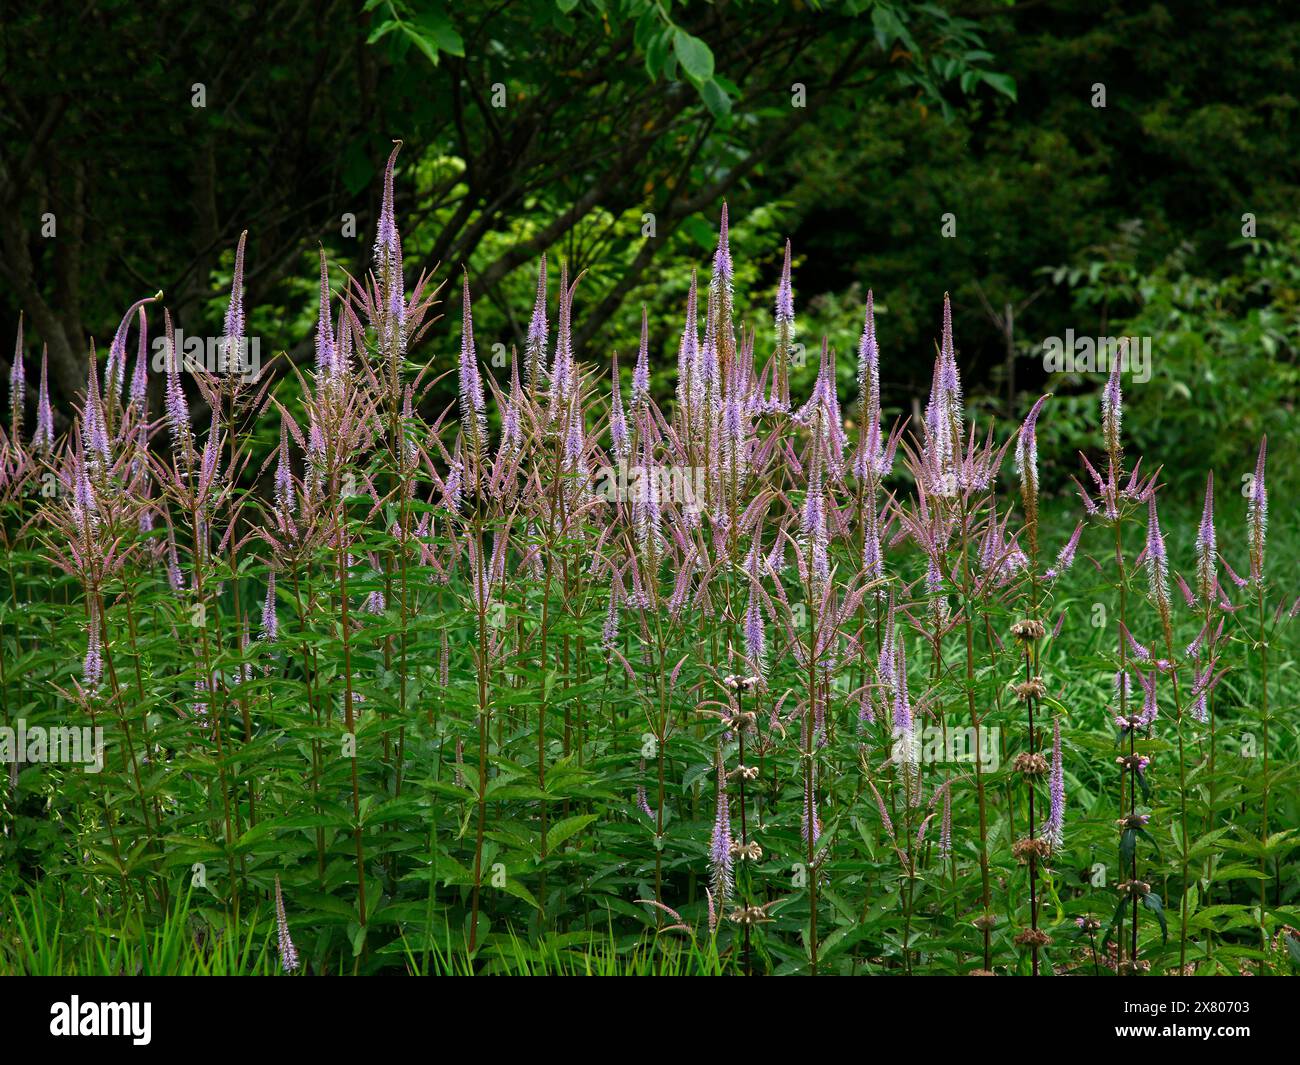 Closeup of the long lilac pink flower spikes of the summer flowering herbaceous perennial garden plant Veronicastrum virginicum adoration. Stock Photo